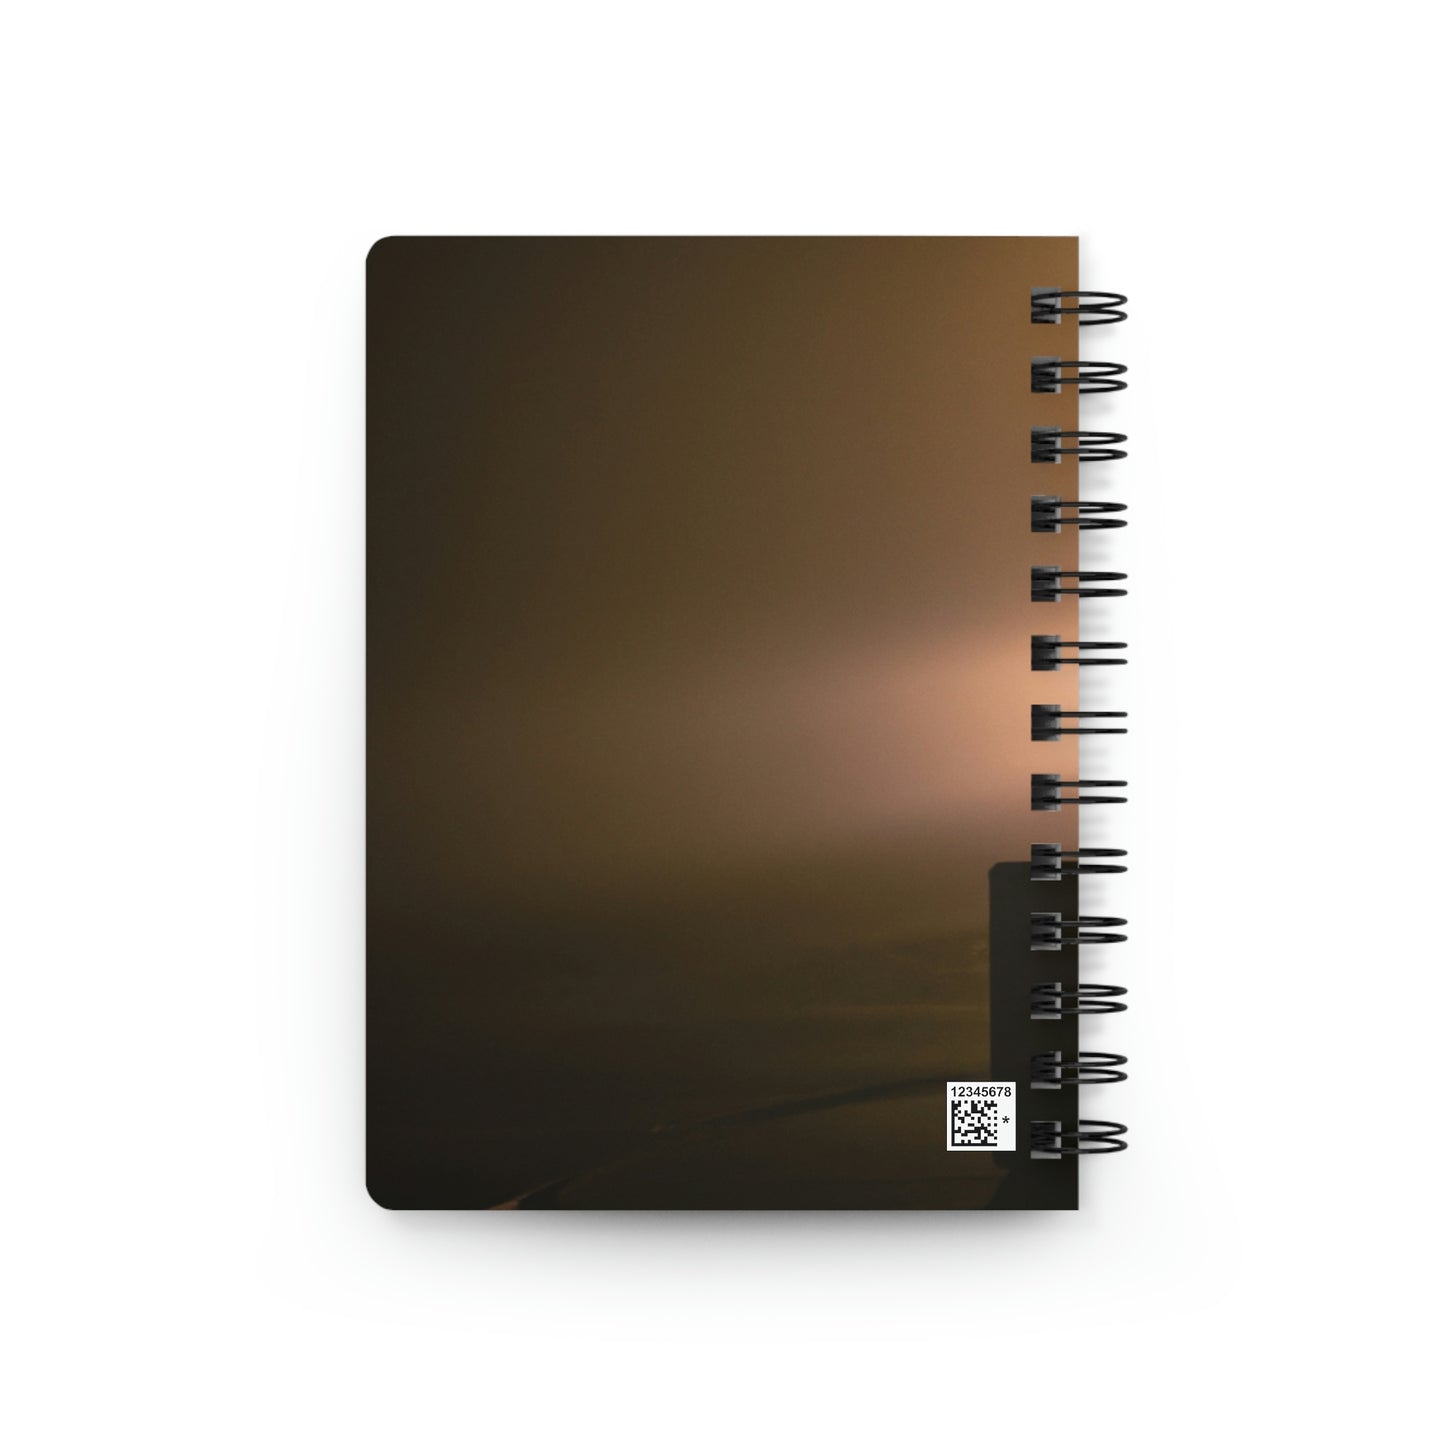 "The Foggy Night Delivery" - The Alien Spiral Bound Journal